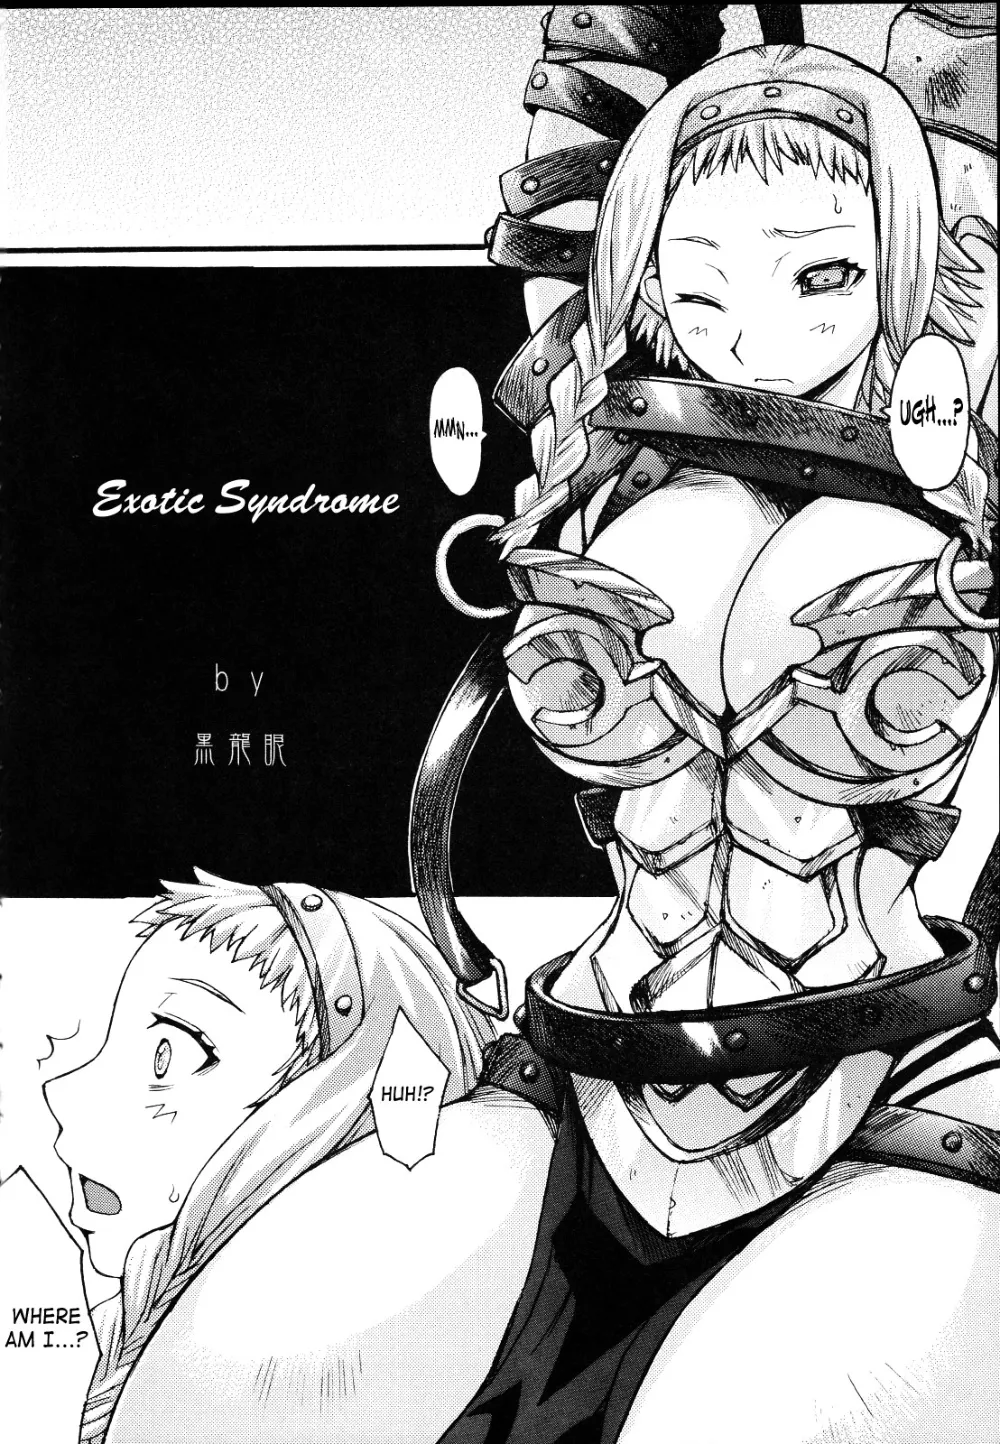 Queens Blade,Exotic Syndrome [English][第5页]